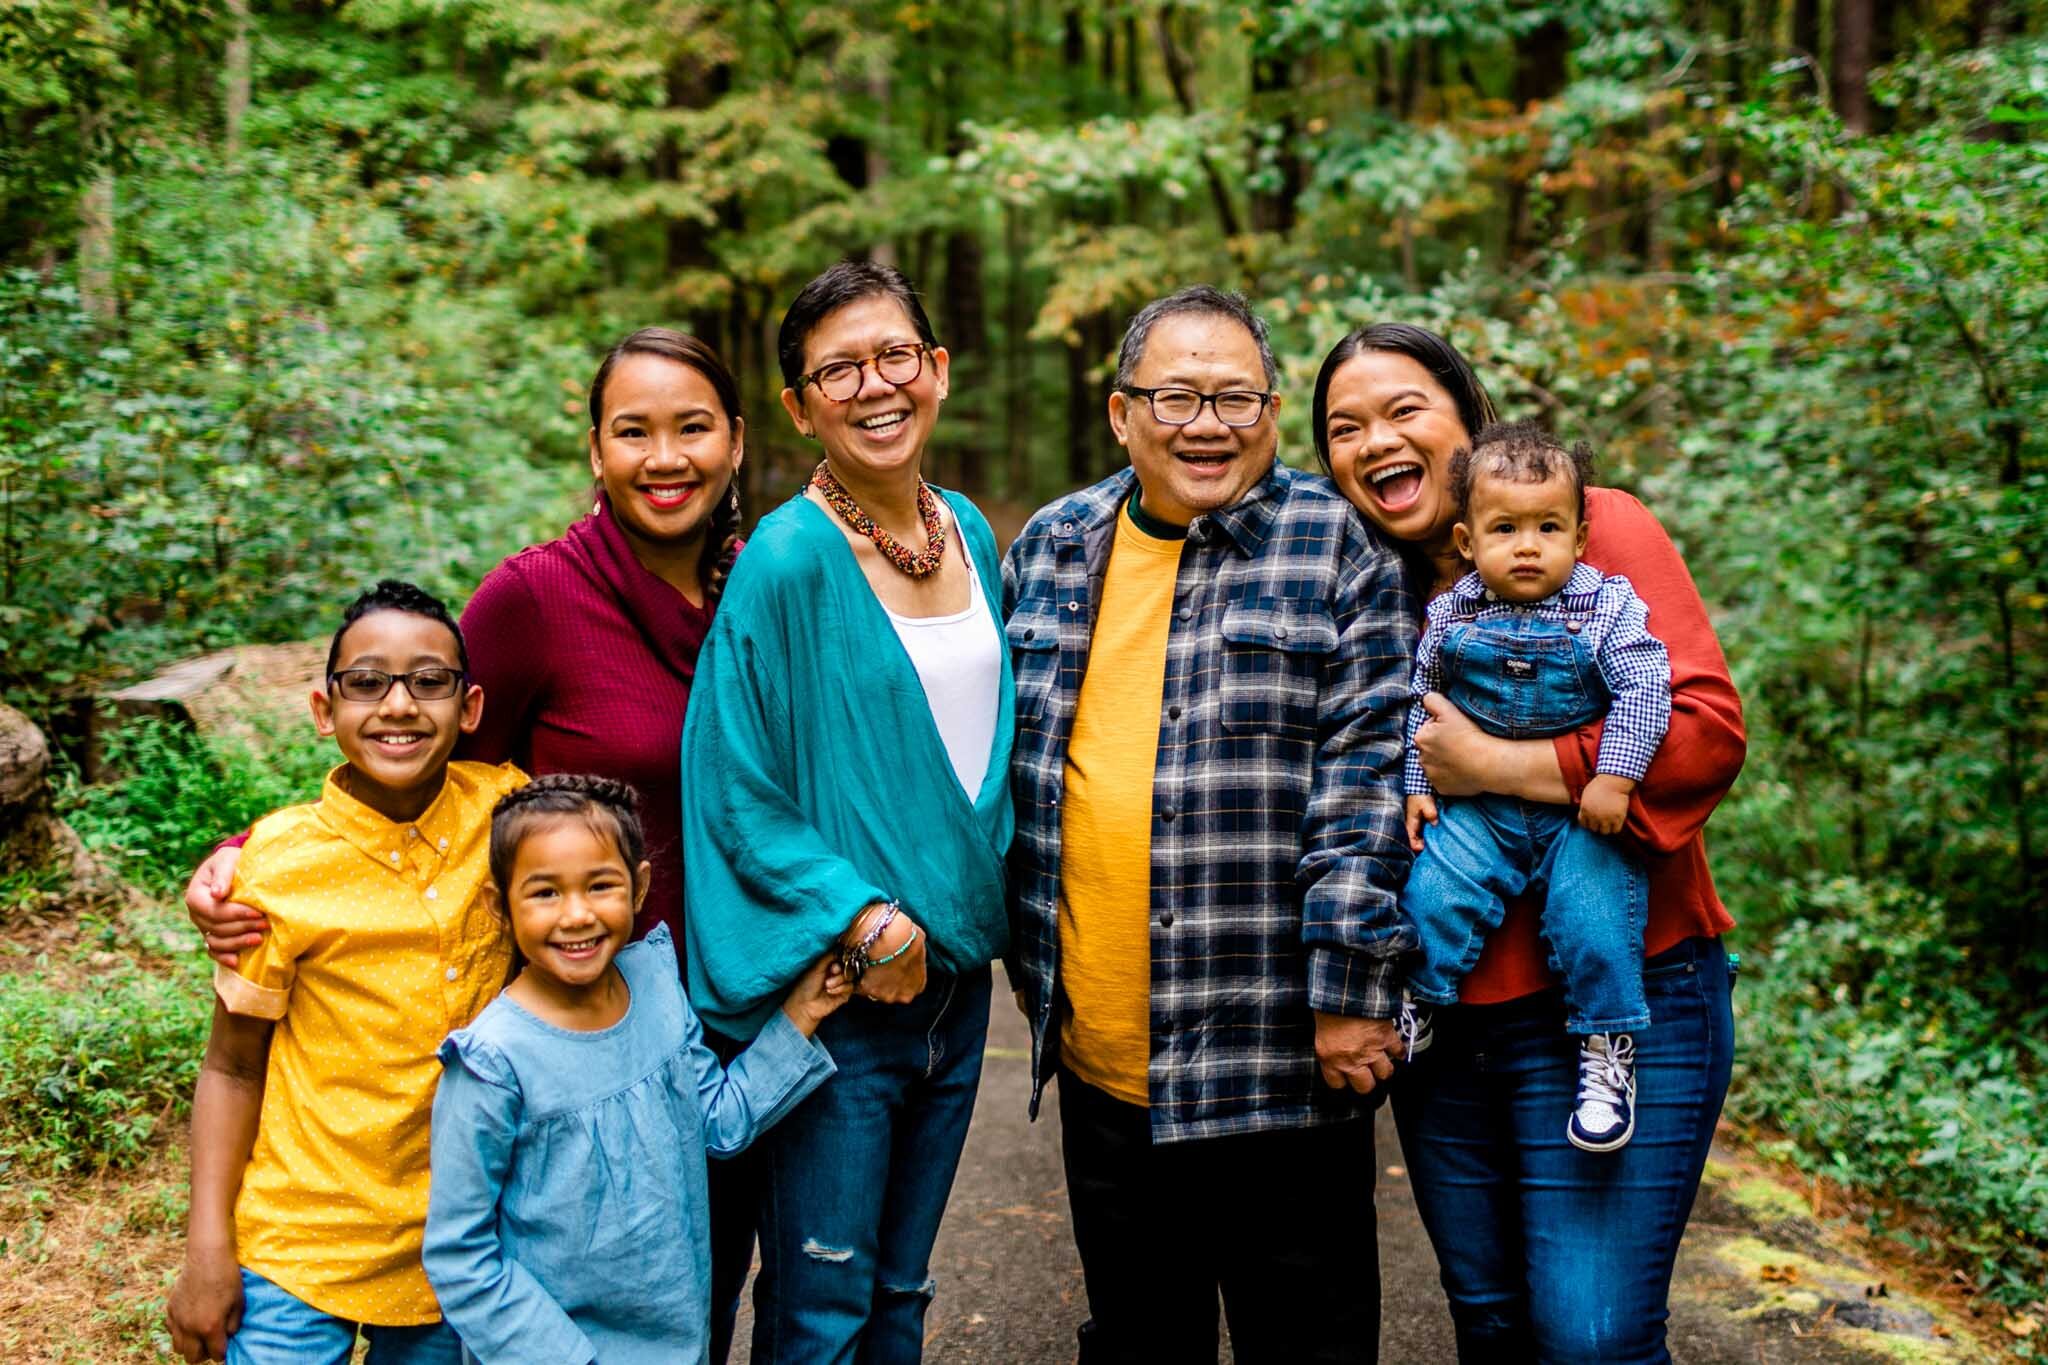 Raleigh Family Photographer | By G. Lin Photography | Umstead Park | Beautiful candid fall family photo